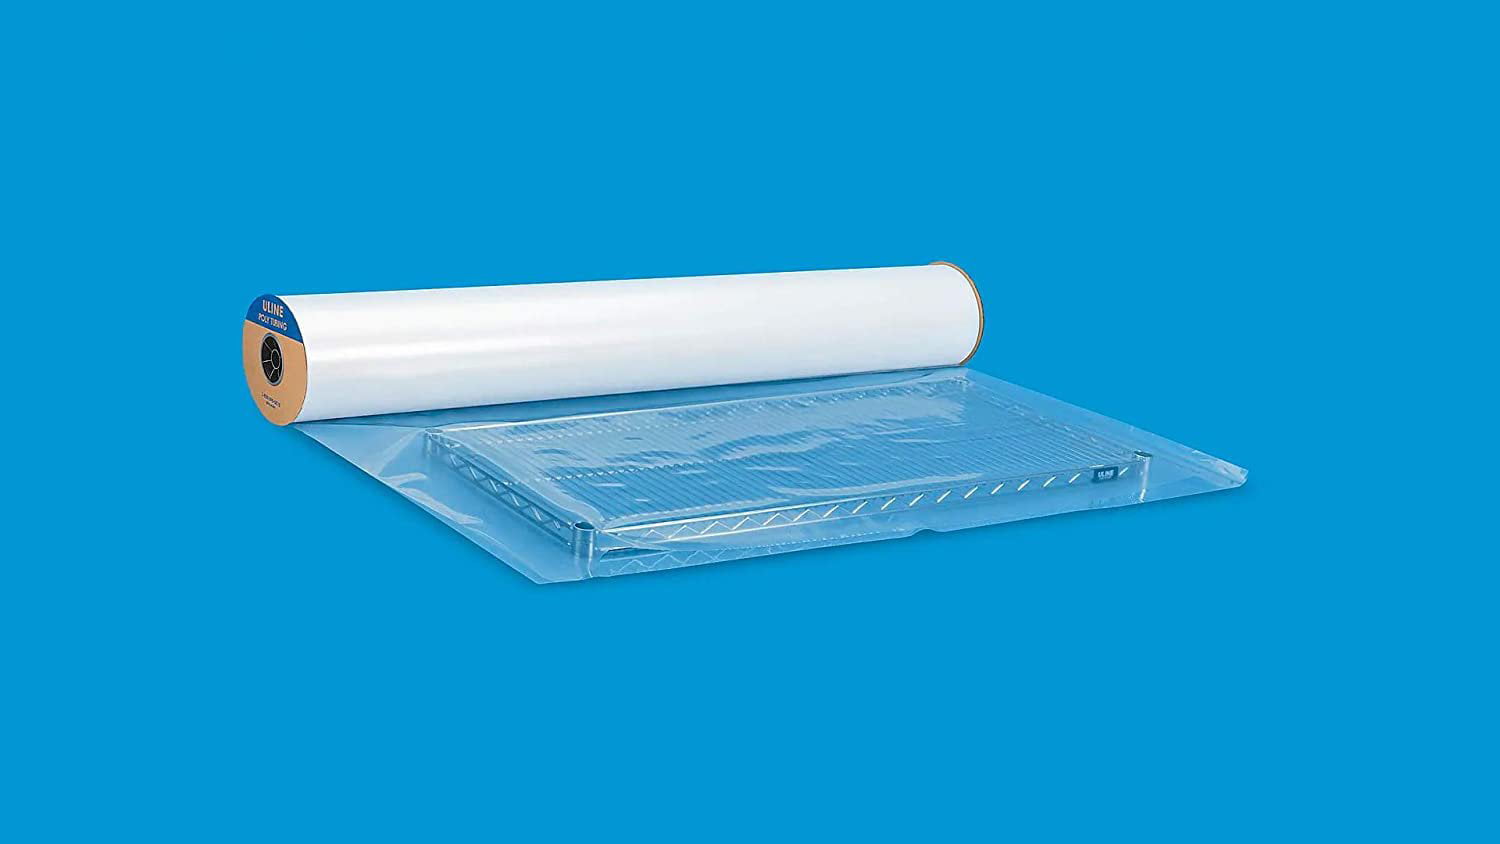 Dropship Roll Of Class 100 Clean Room Tubing 10' X 500'. Heavy Duty  Polyethylene Tubing. Thickness 6 Mil. Clear Plastic Poly Bags For  Industrial; Foodservice Applications. to Sell Online at a Lower